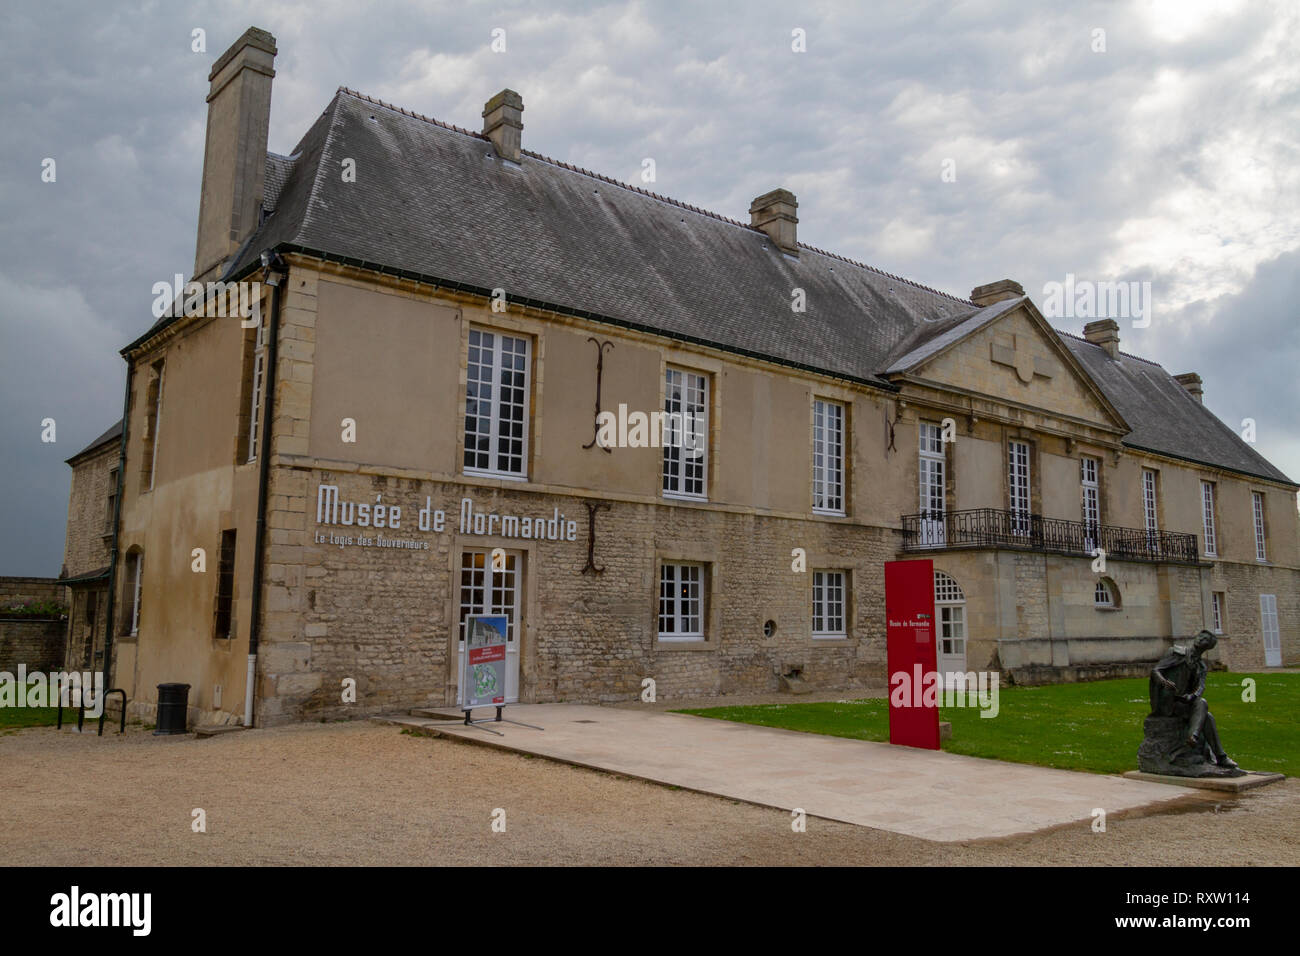 The Musee de Normandie (Museum of Normandy) in Caen, Normandy, France. Stock Photo